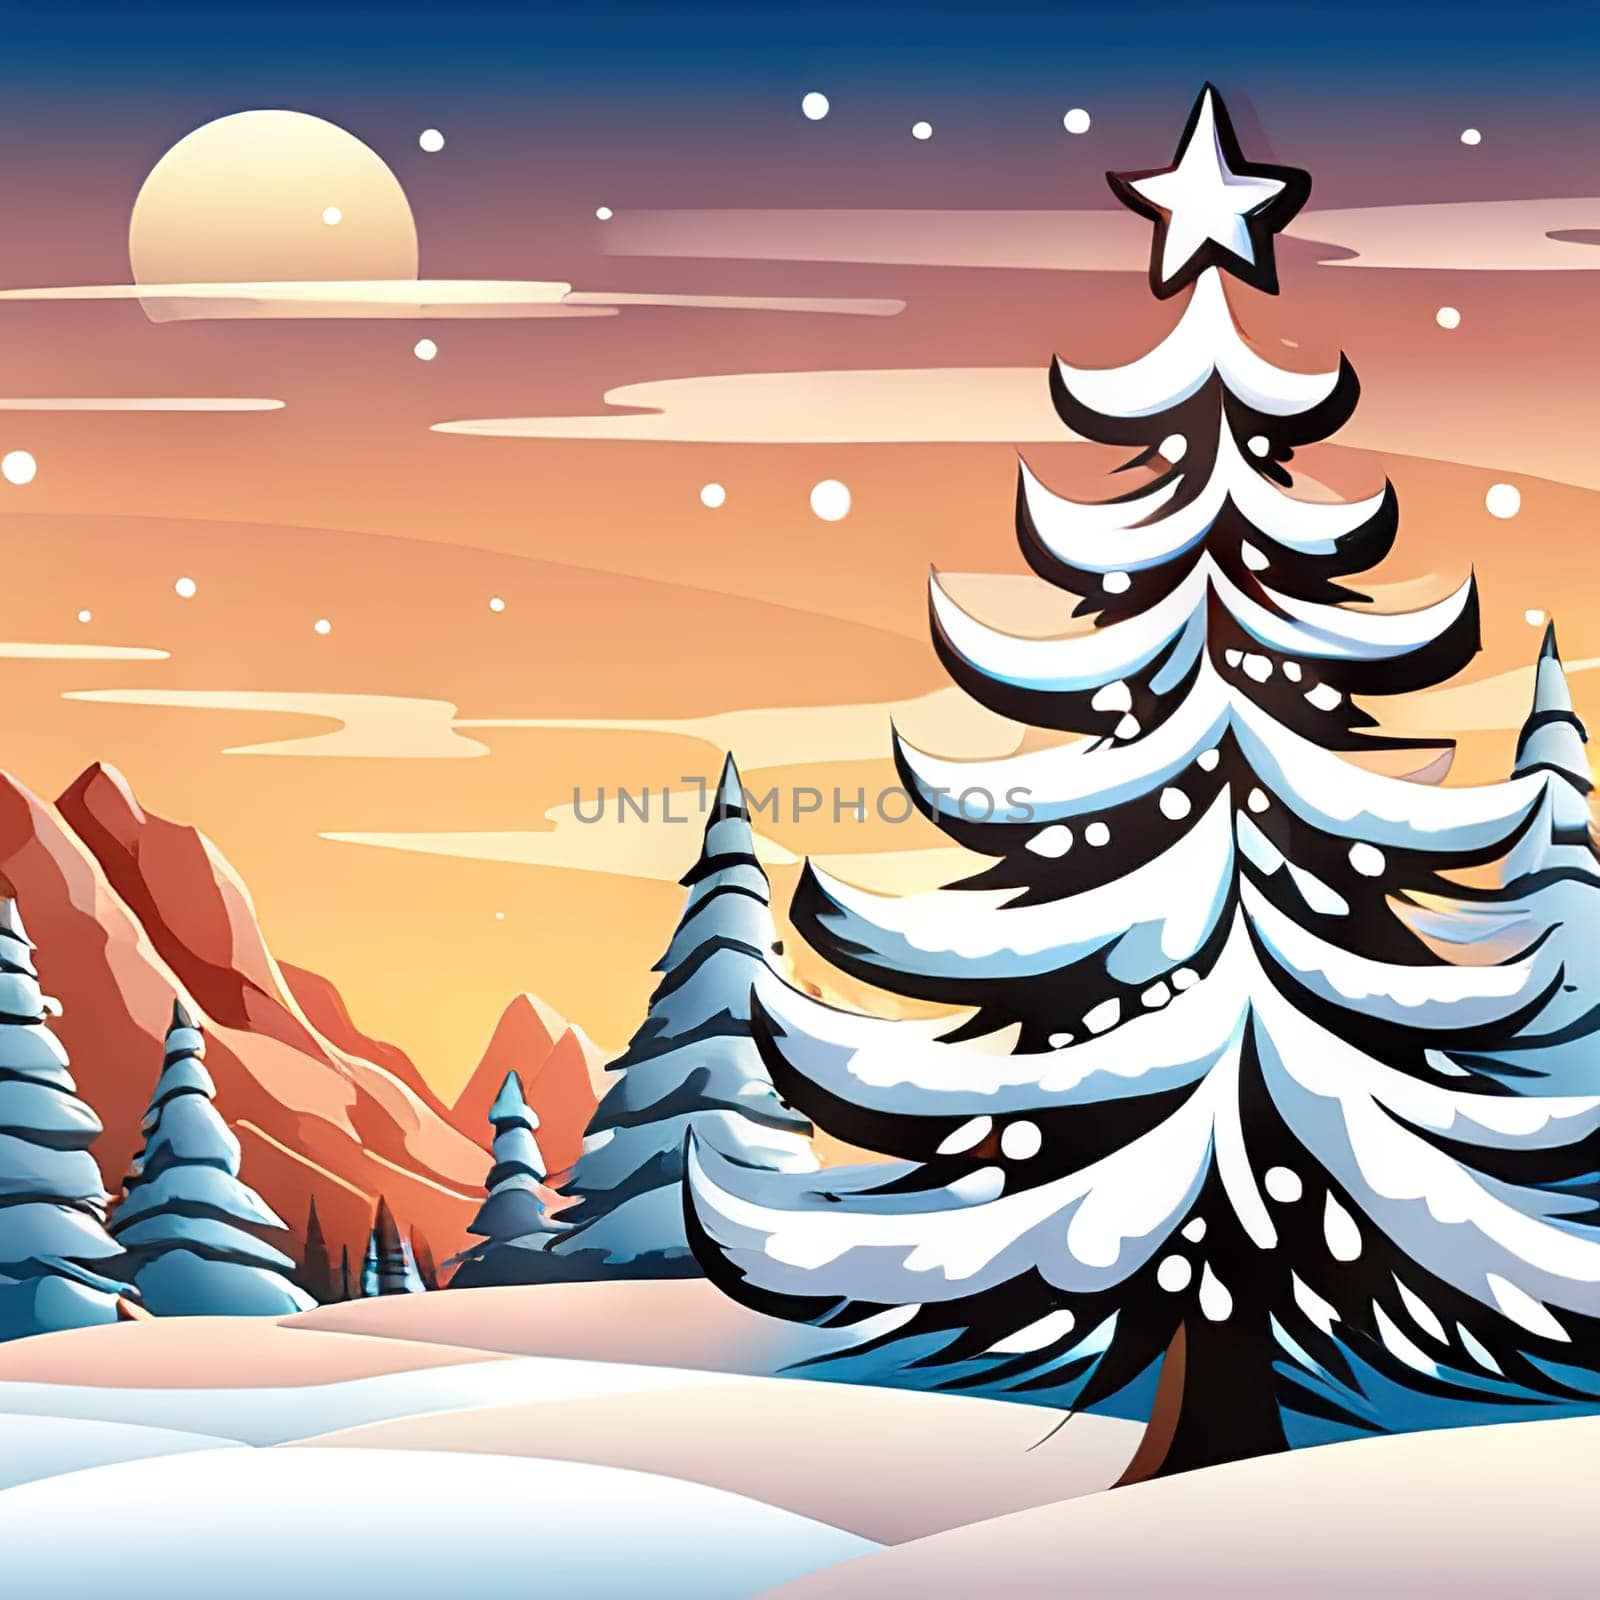 Merry Christmas and Happy New Year greeting card. Christmas landscape by EkaterinaPereslavtseva